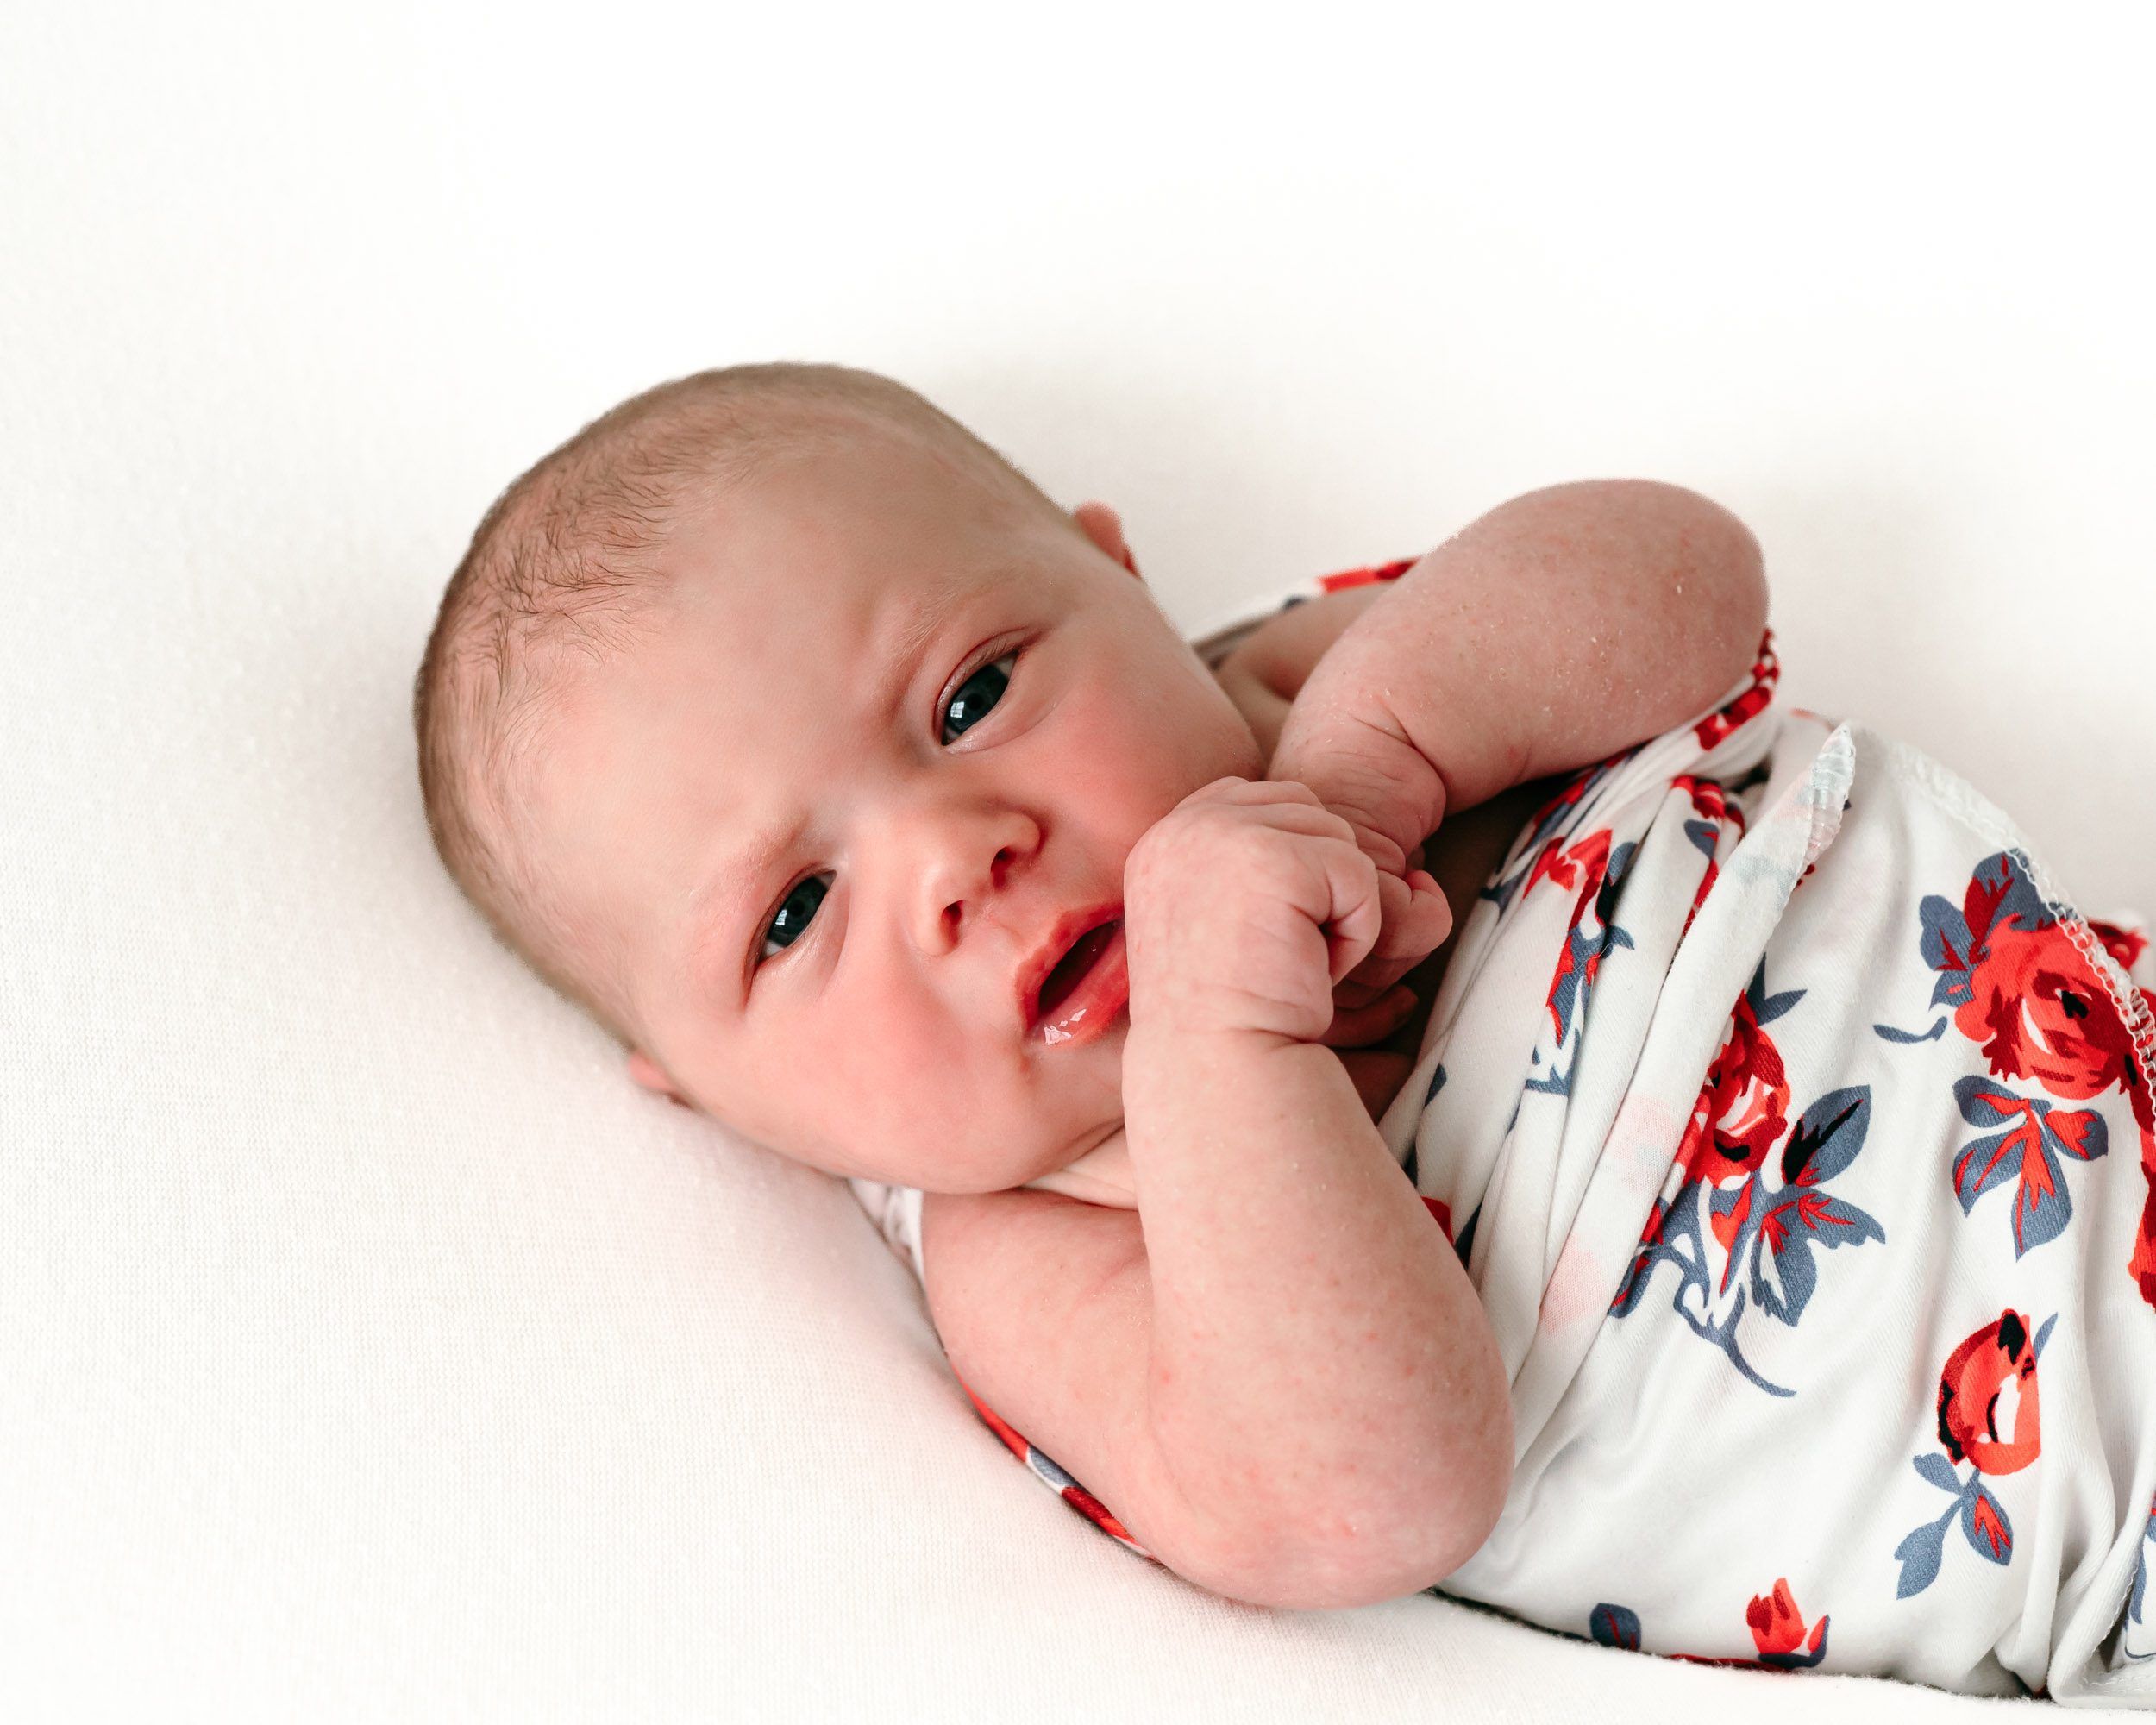 a baby girl wrapped in a white swaddle with a bright red and blue floral pattern laying on a white backdrop and gazing directly into the camera with her hands tucked up  against her cheek during a newborn photoshoot